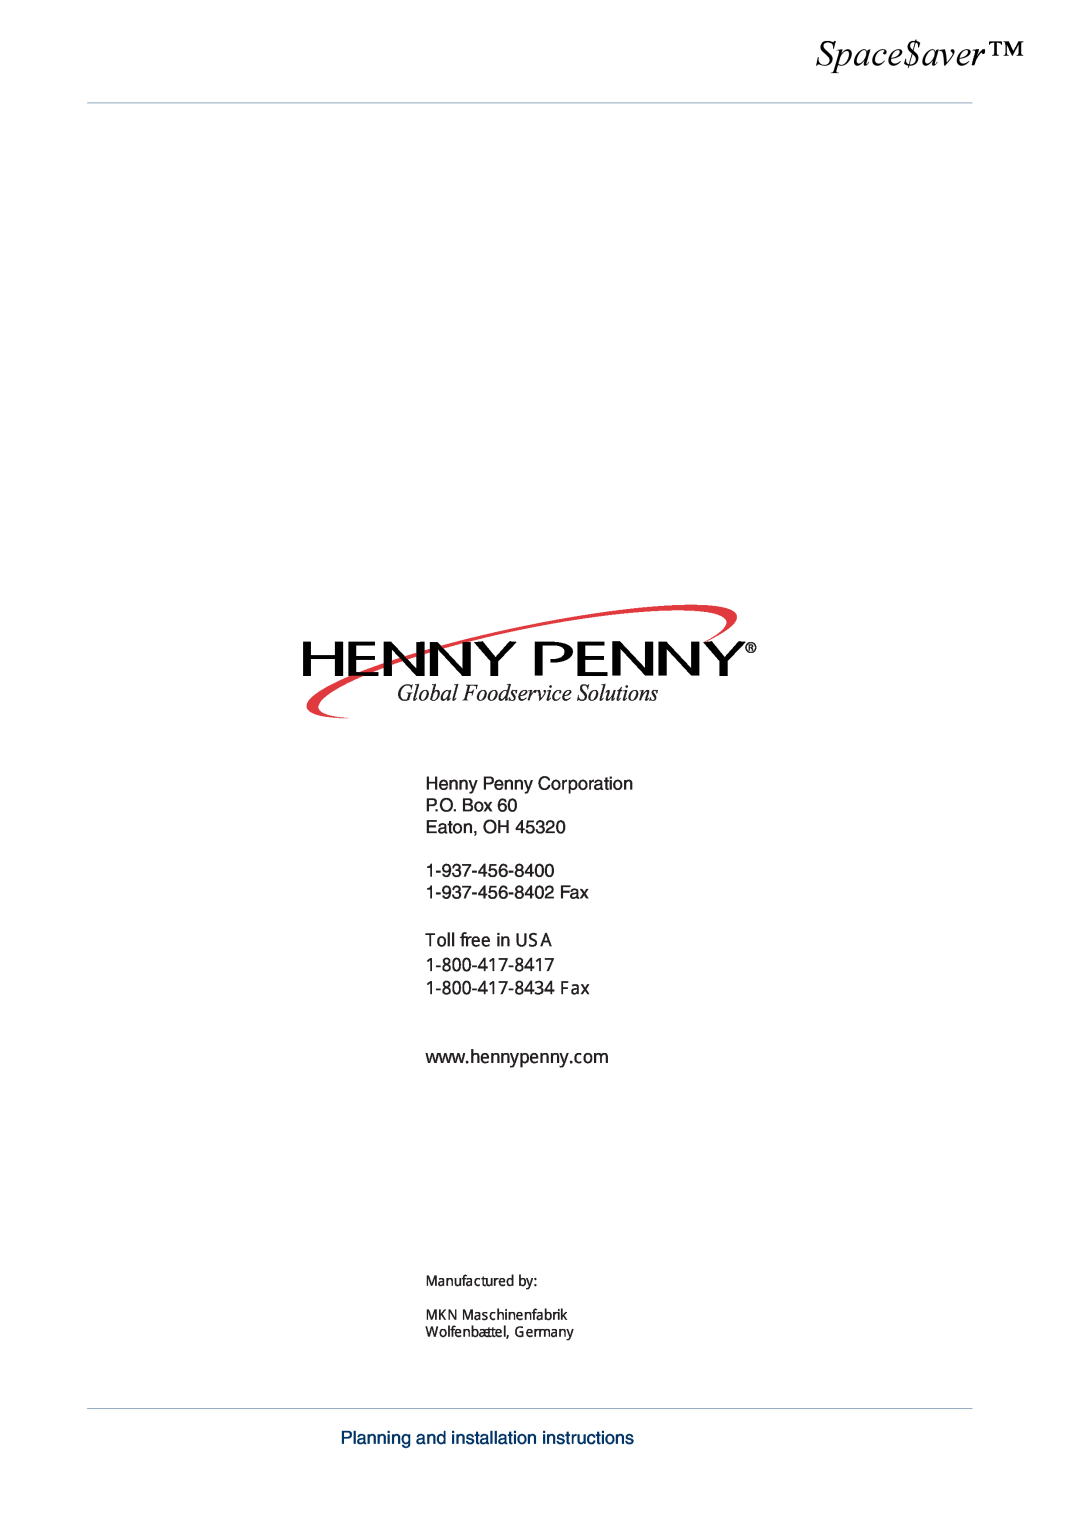 Henny Penny 605ESC63XXXX Space$aver, Global Foodservice Solutions, Henny Penny Corporation P.O. Box Eaton, OH,   